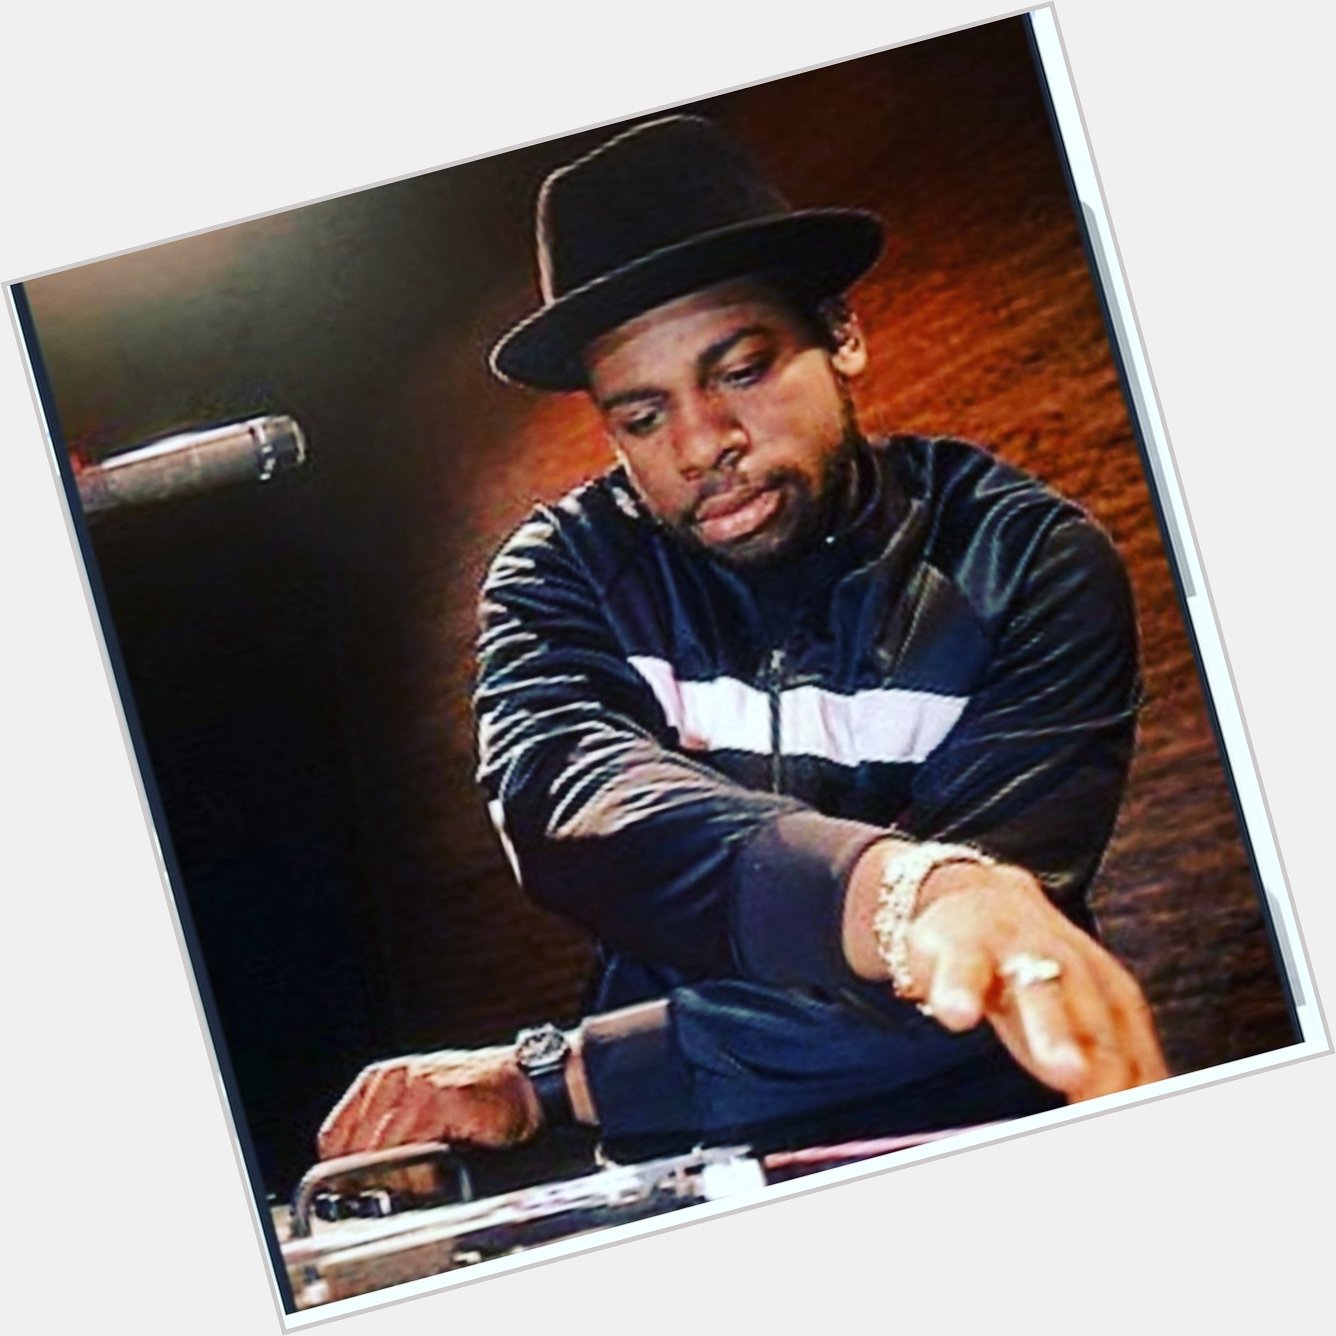 Happy birthday Jam master Jay. May you rest peacefully forever... 